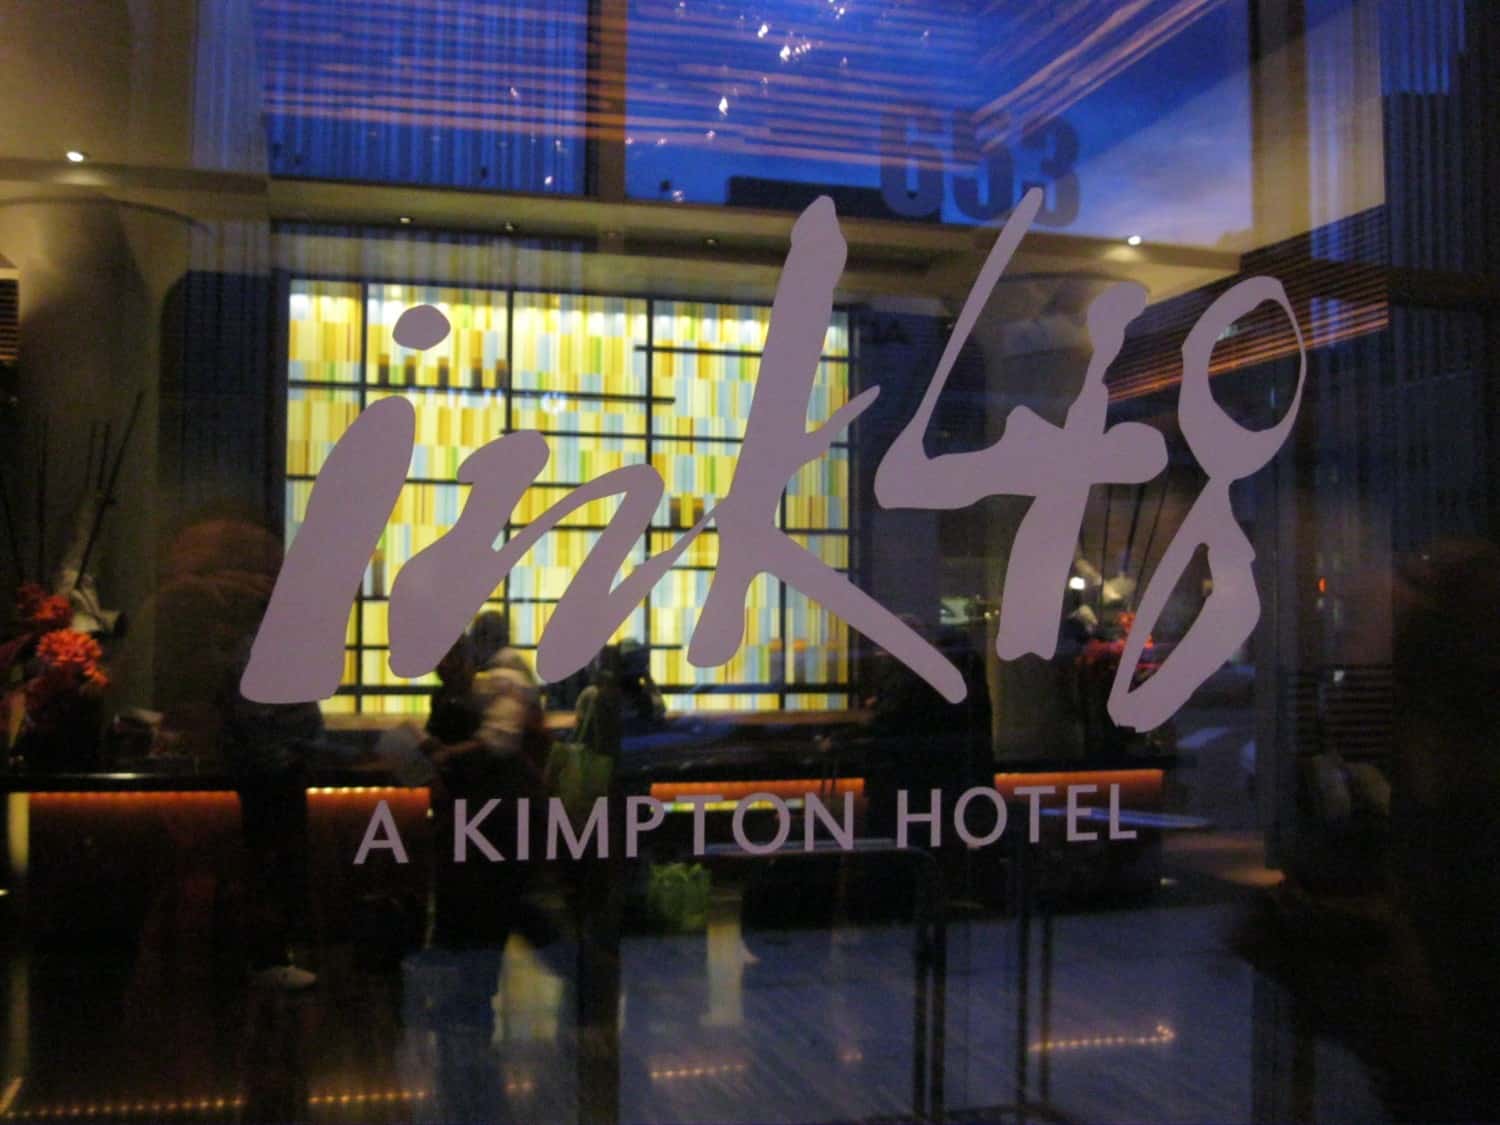 Ink 48 in New York - Kimpton Hotel.  One of the hotel chains for pets, where pets stay for free!